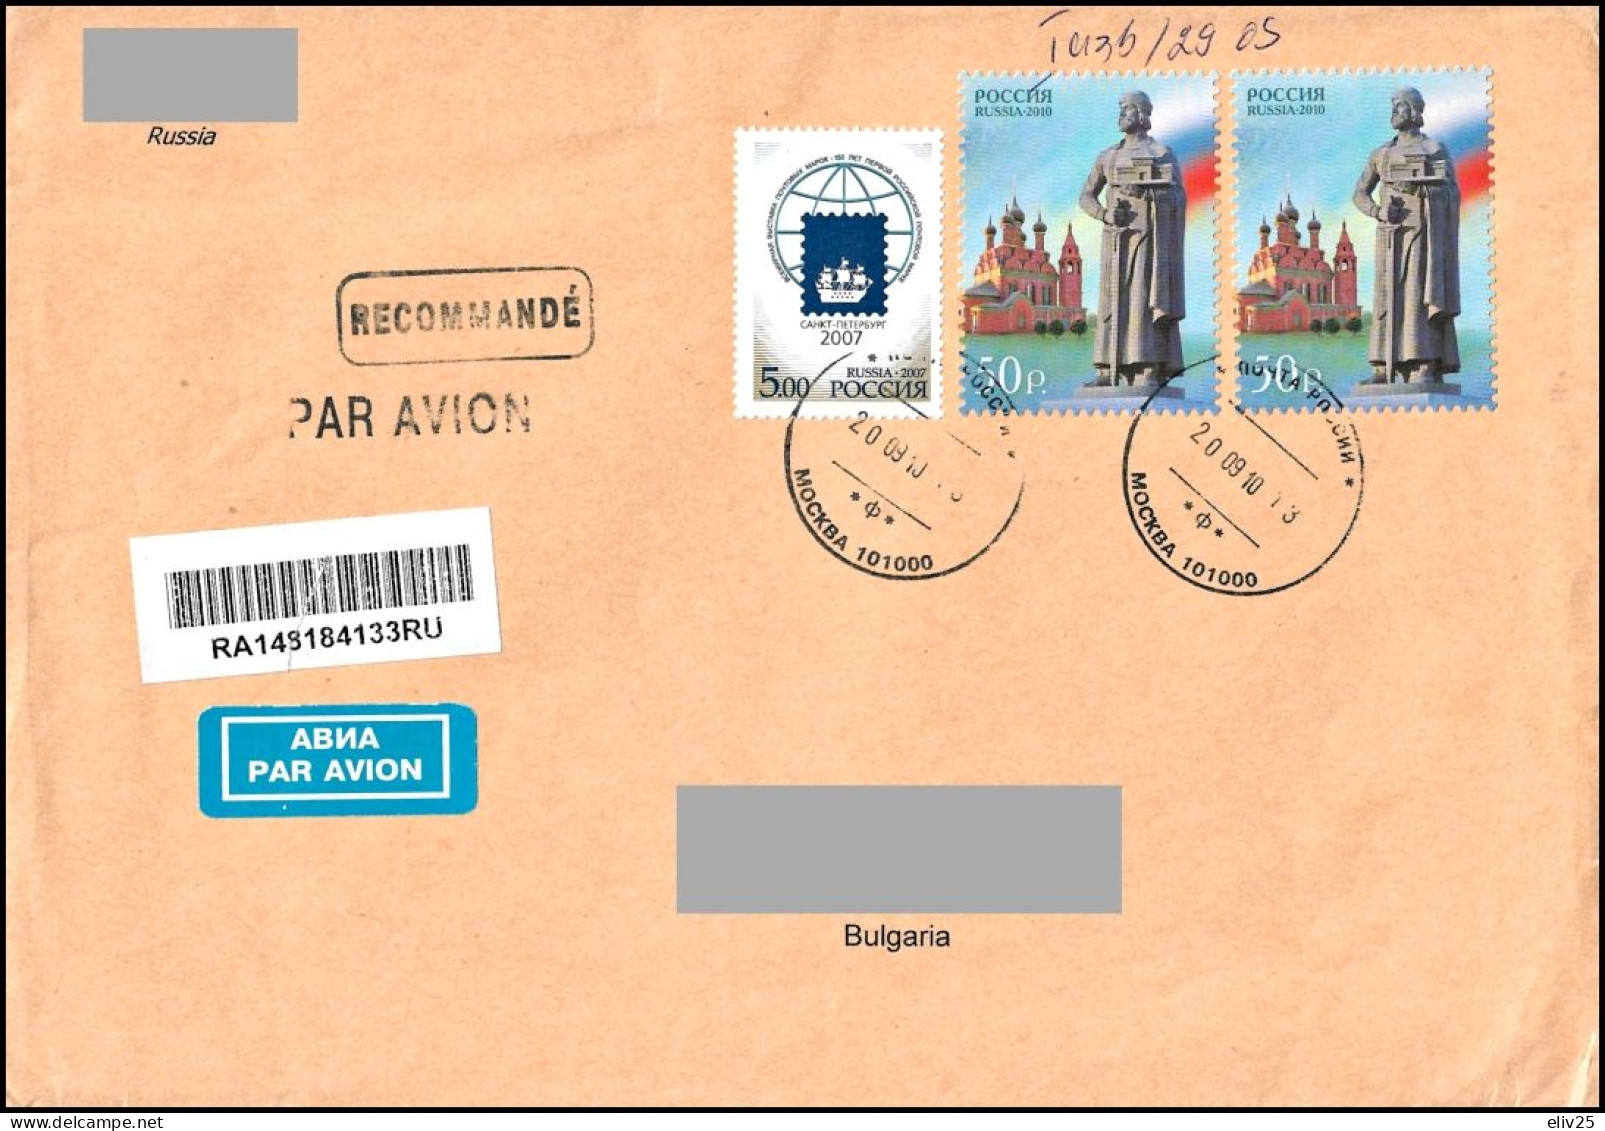 Russia 2010, Cover To Bulgaria - Covers & Documents